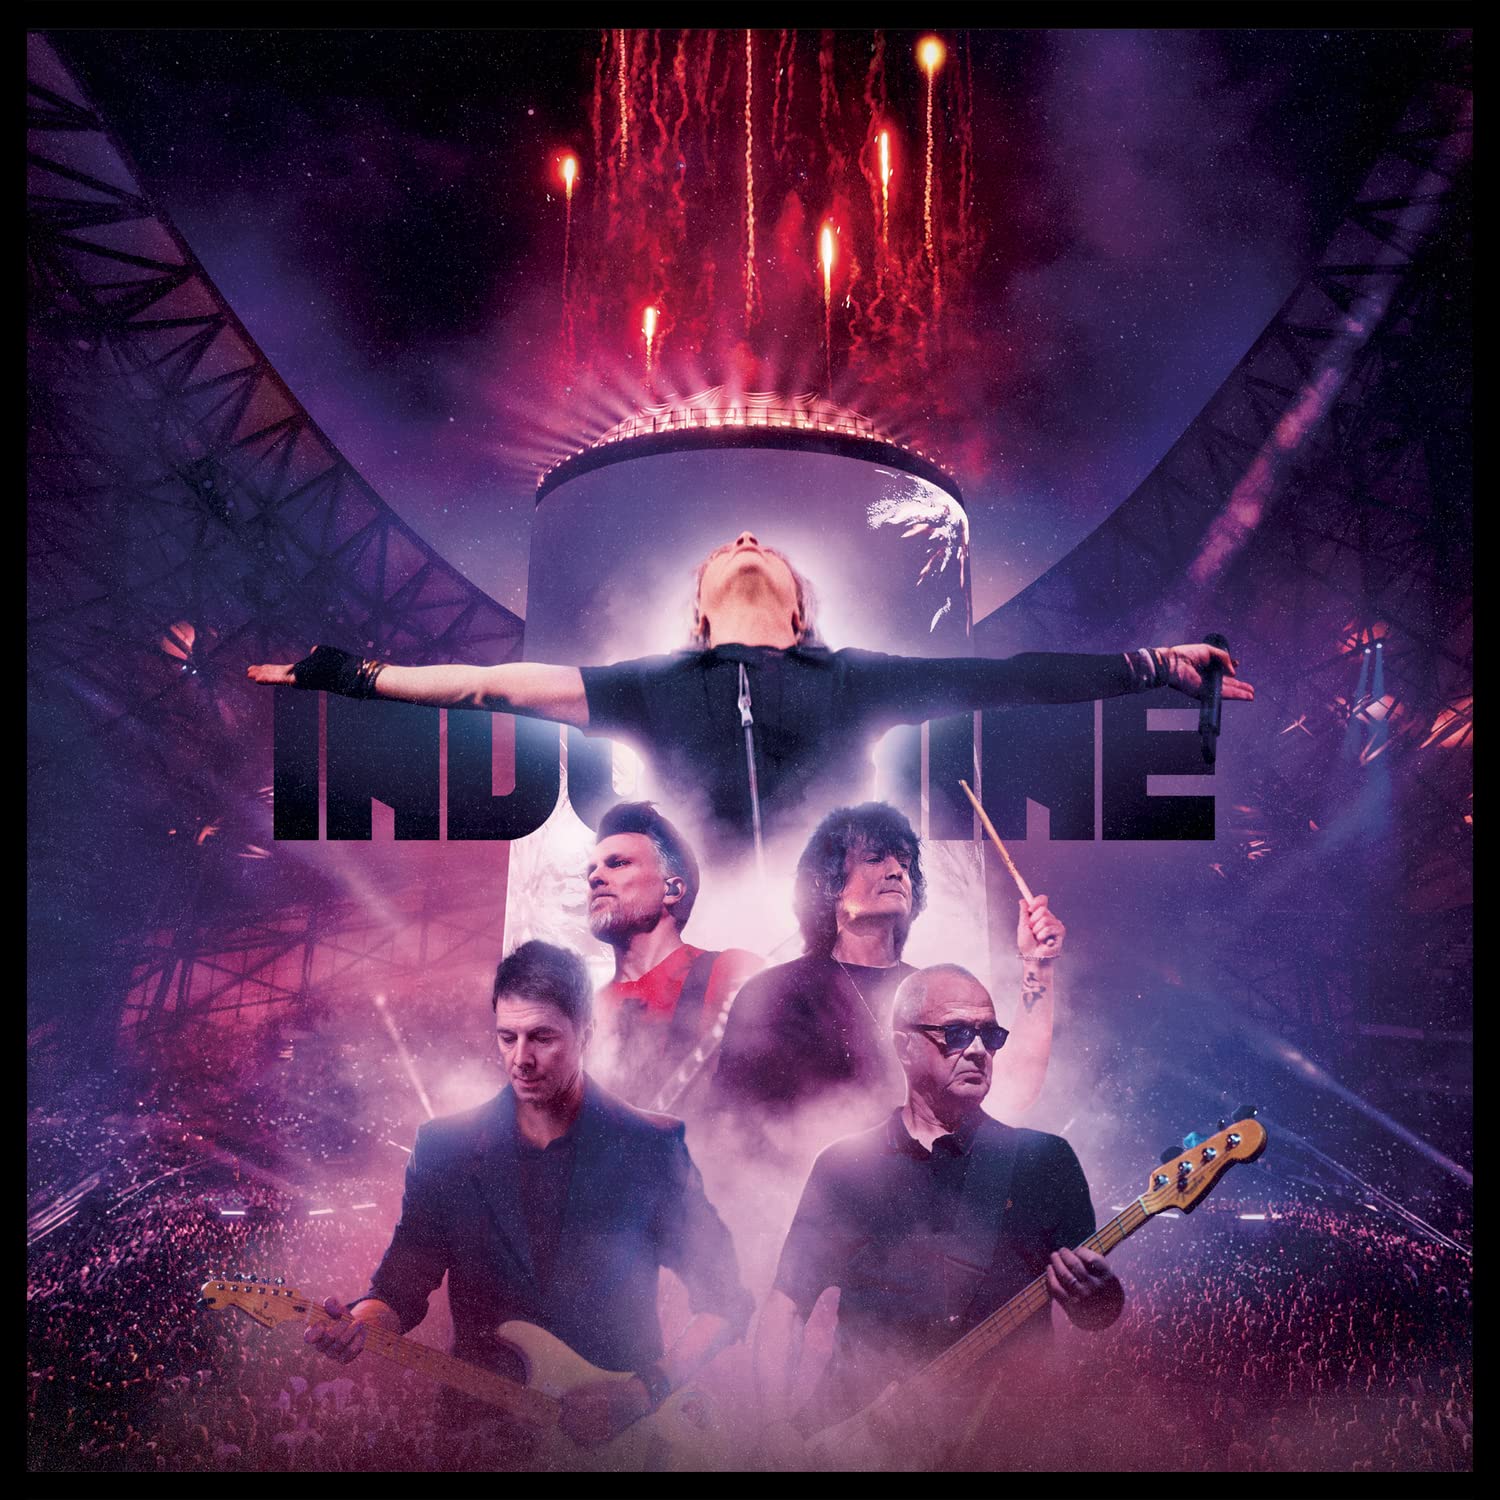 indochine central tour streaming gratuit